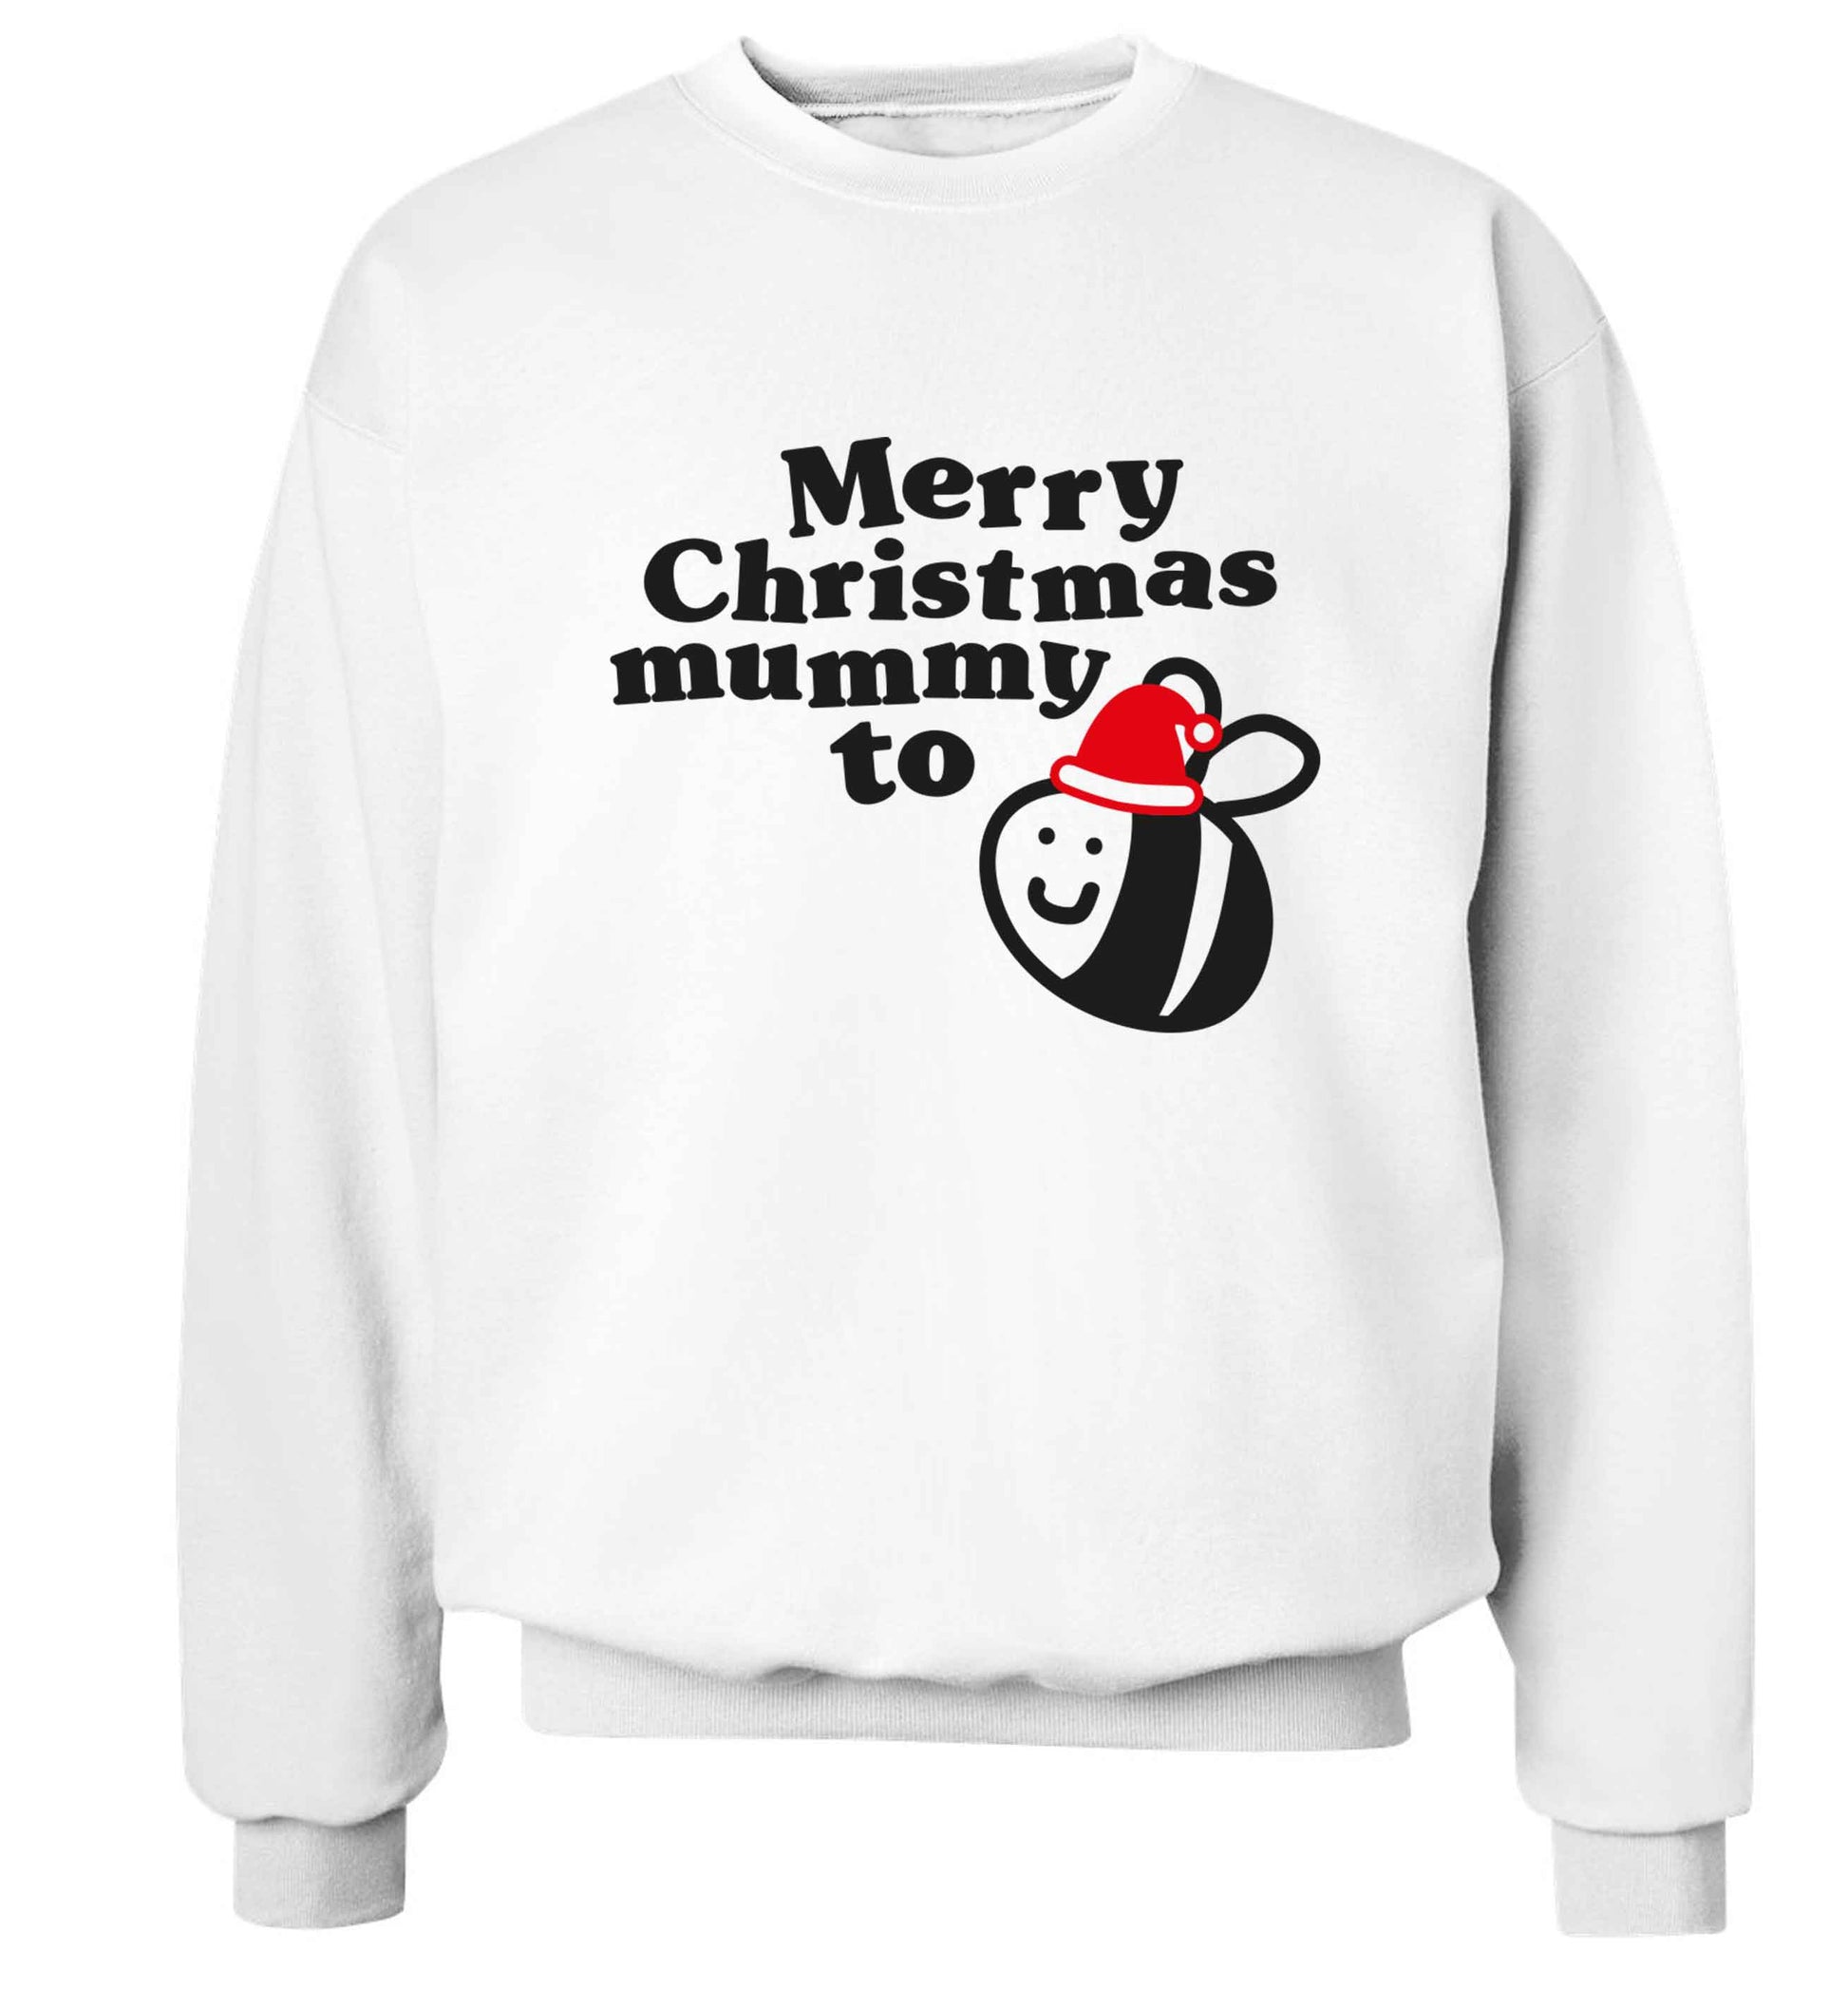 Merry Christmas mummy to be Adult's unisex white Sweater 2XL